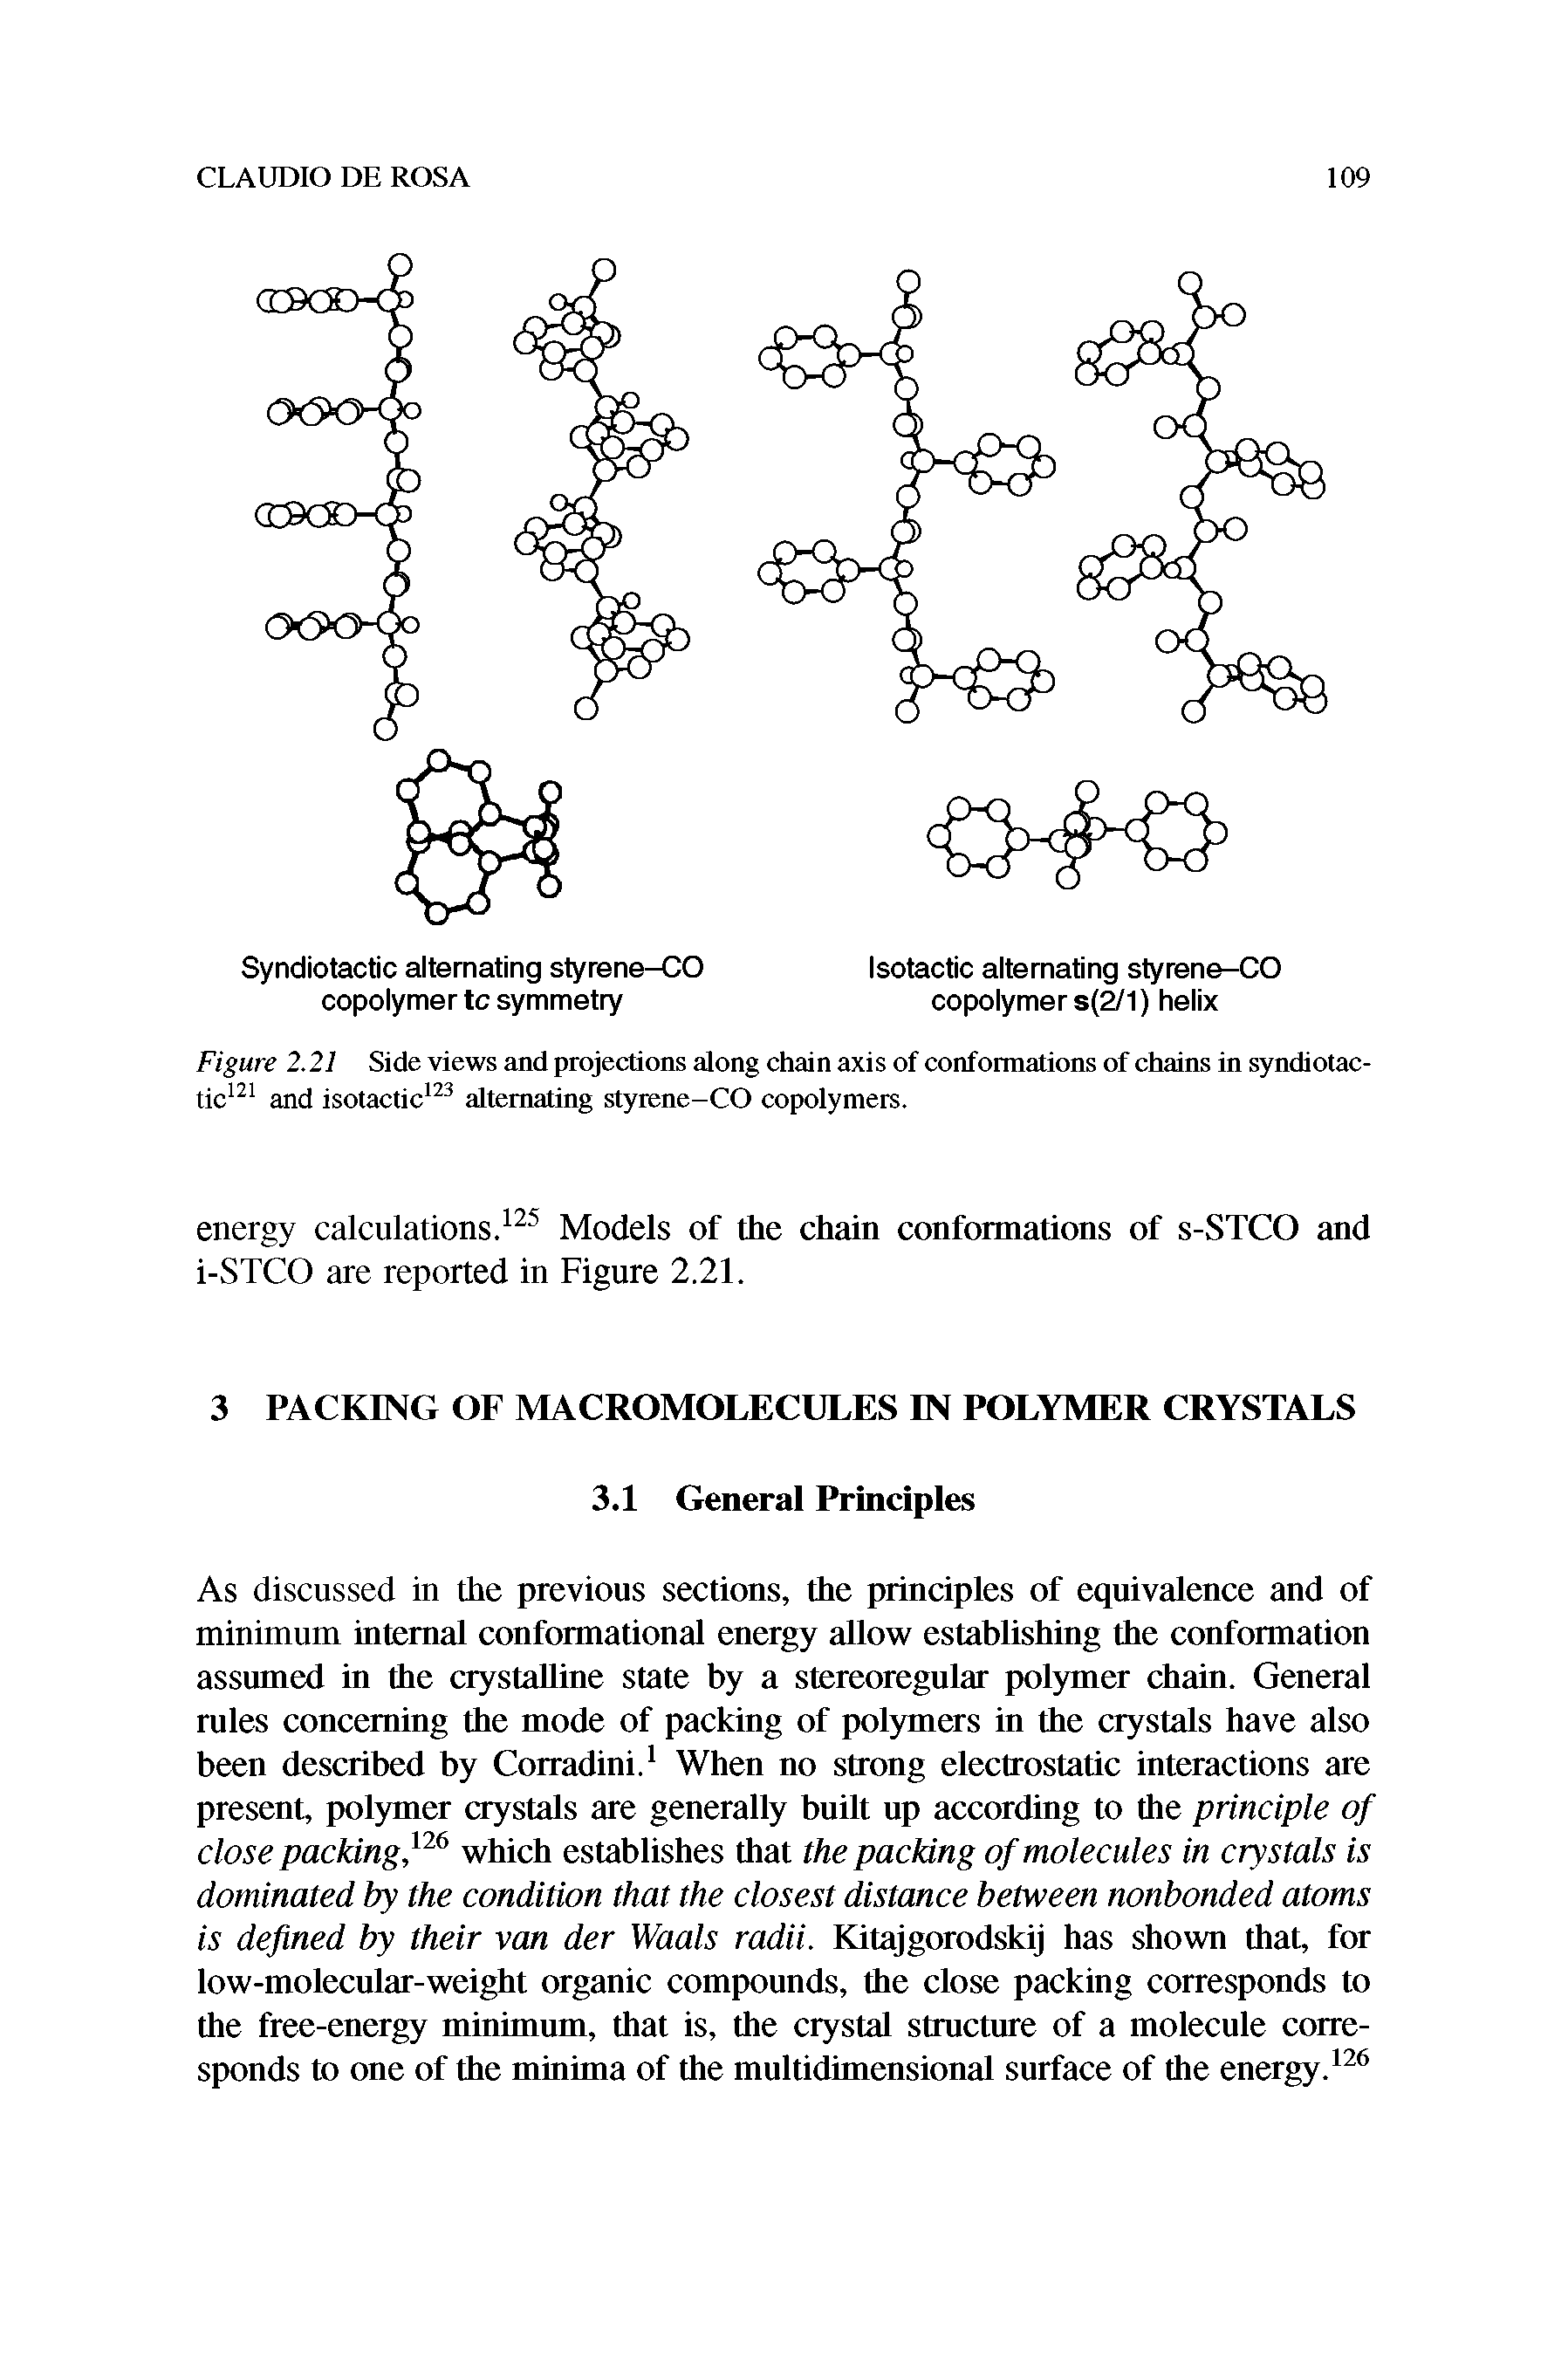 Figure 2.21 Side views and projections along chain axis of conformations of chains in syndiotactic121 and isotactic123 alternating styrene-CO copolymers.